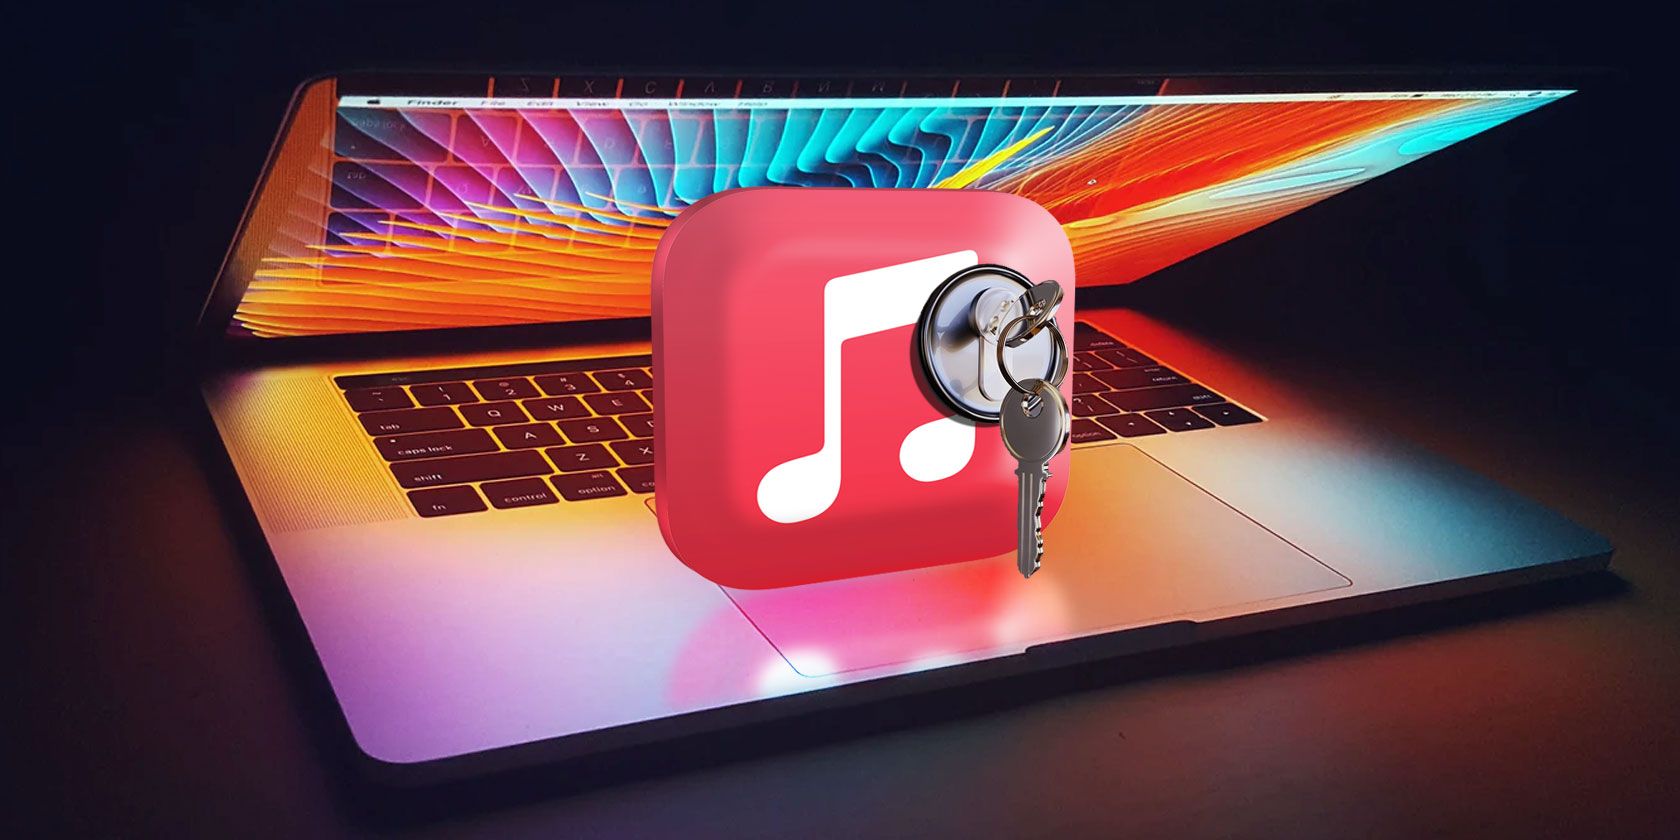 iTunes Authorized Explained: What It Is and How to Use It, End Game Boss, endgameboss.com